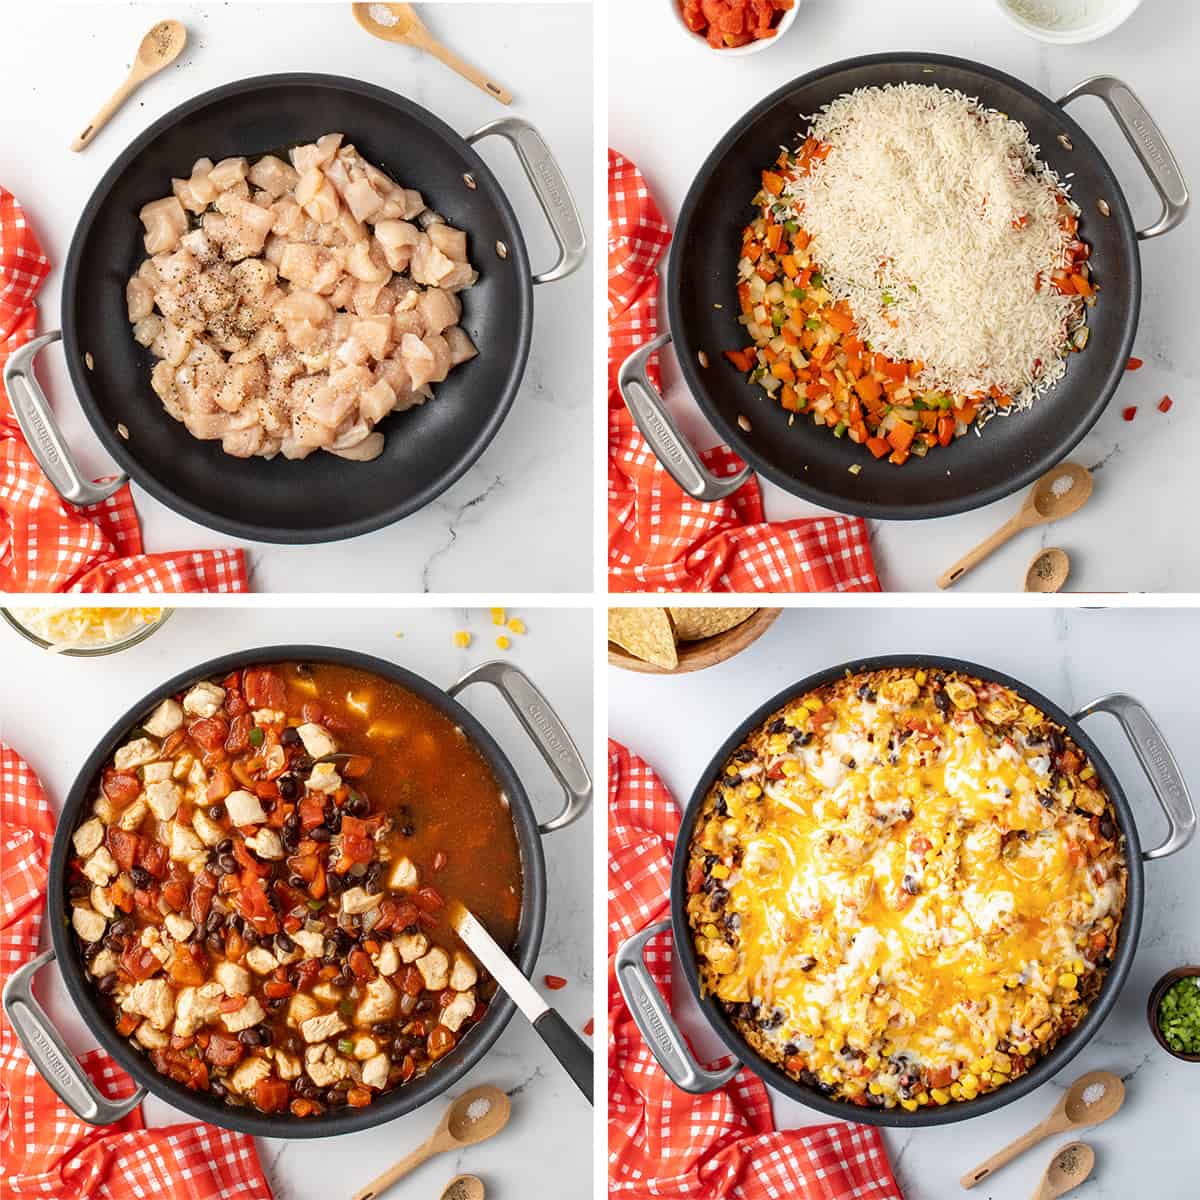 Four images of chicken, peppers, onions, rice and other ingredients cooking in a skillet.